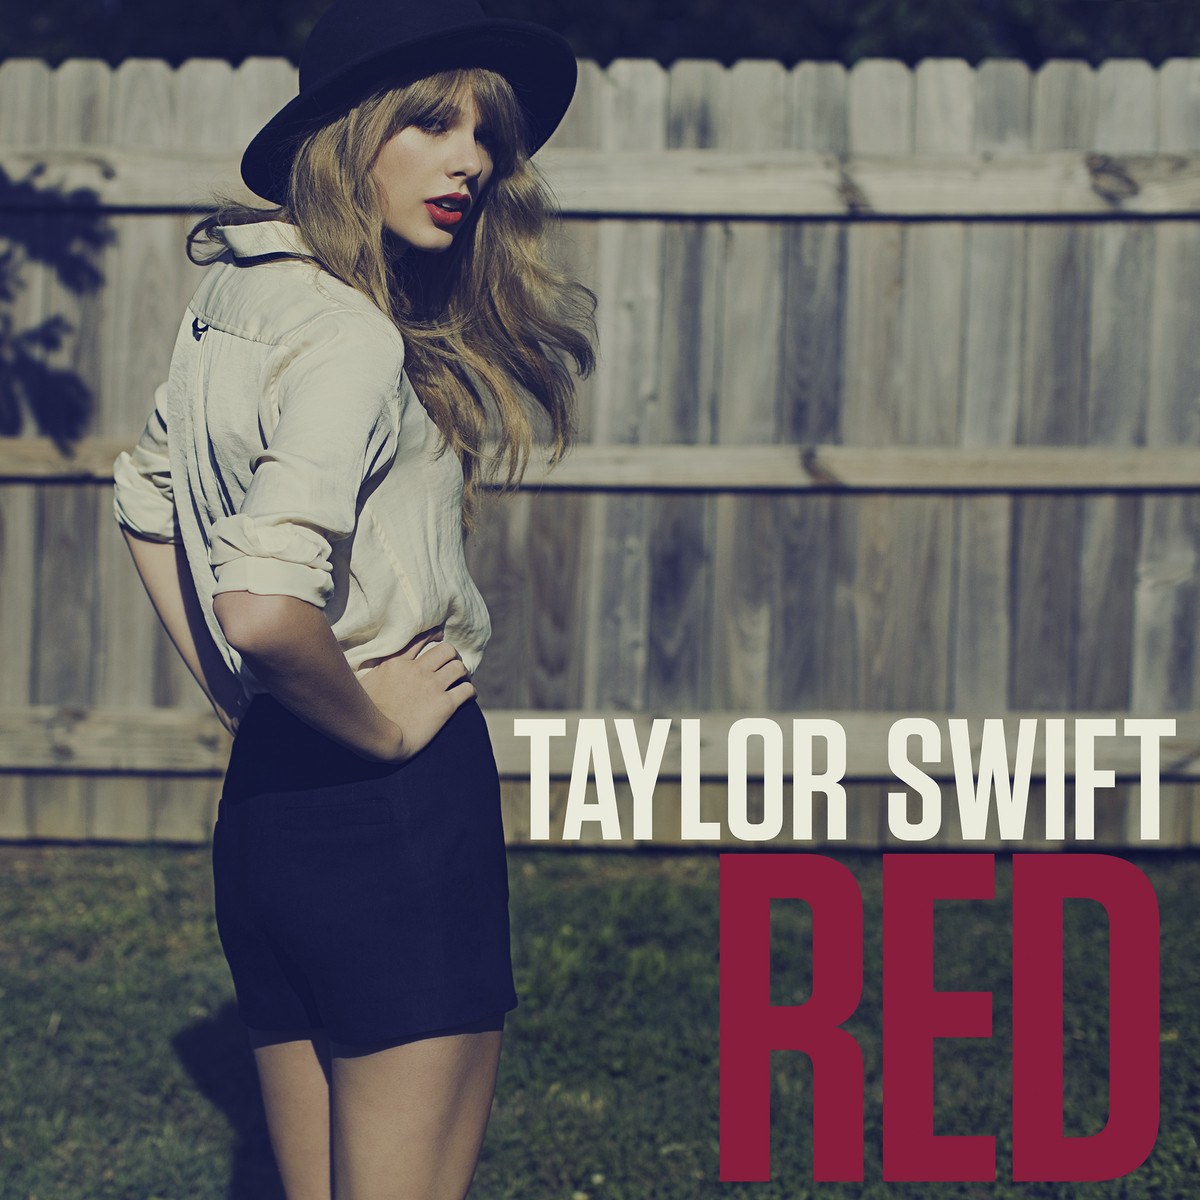 Taylor-Swift-Red-Single-2012-1200x1200.png